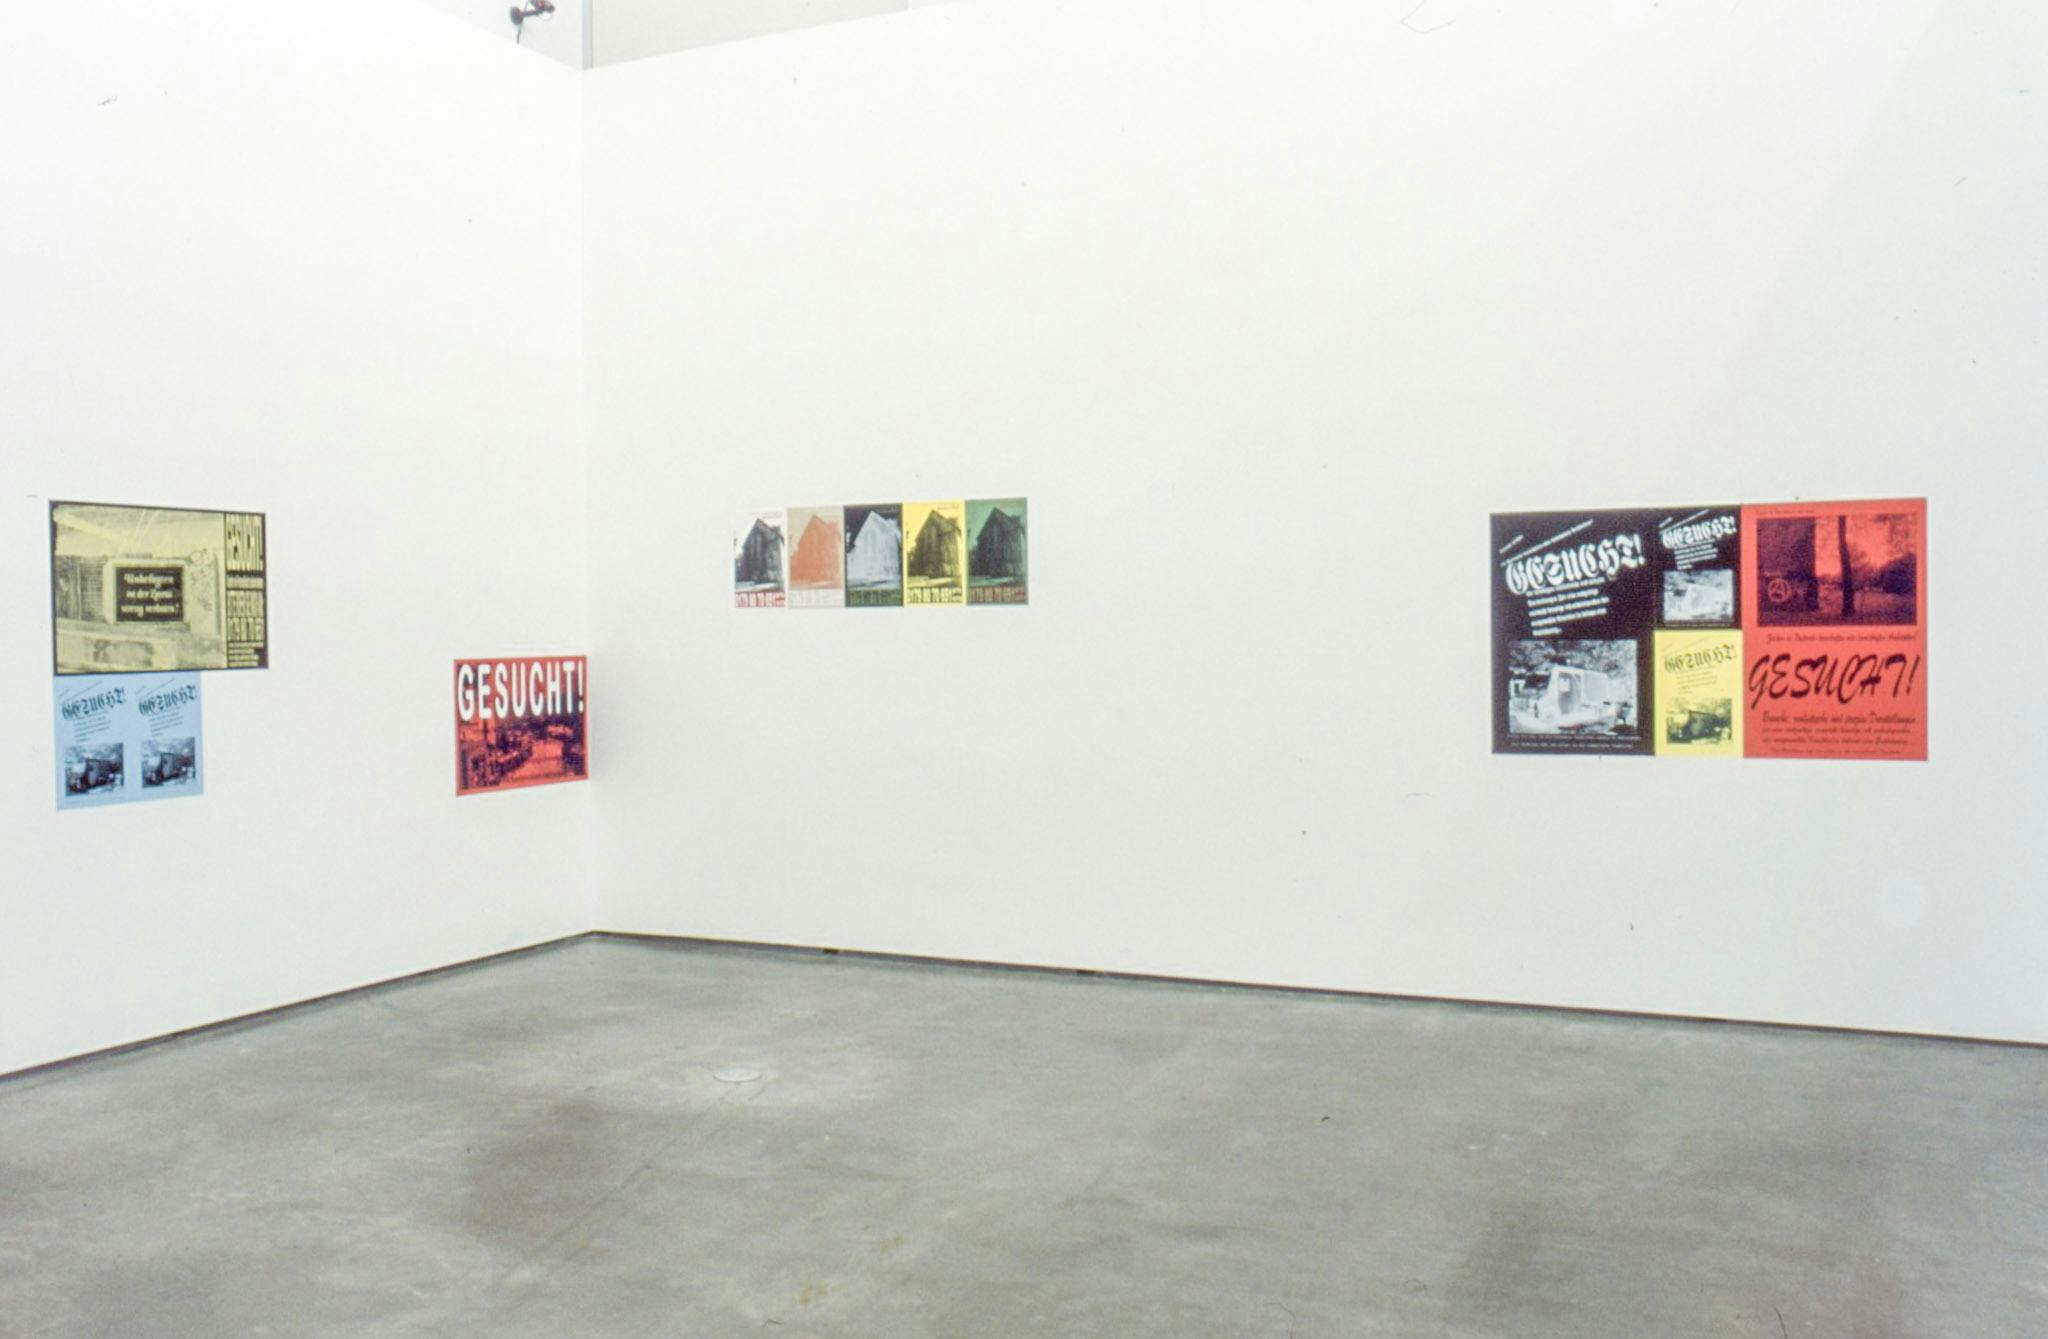 Installation image of posters by Alex Morrison. Five various-sized posters are mounted on the walls. The posters are coloured red, yellow, green, and light blue. Some of them are black and white.